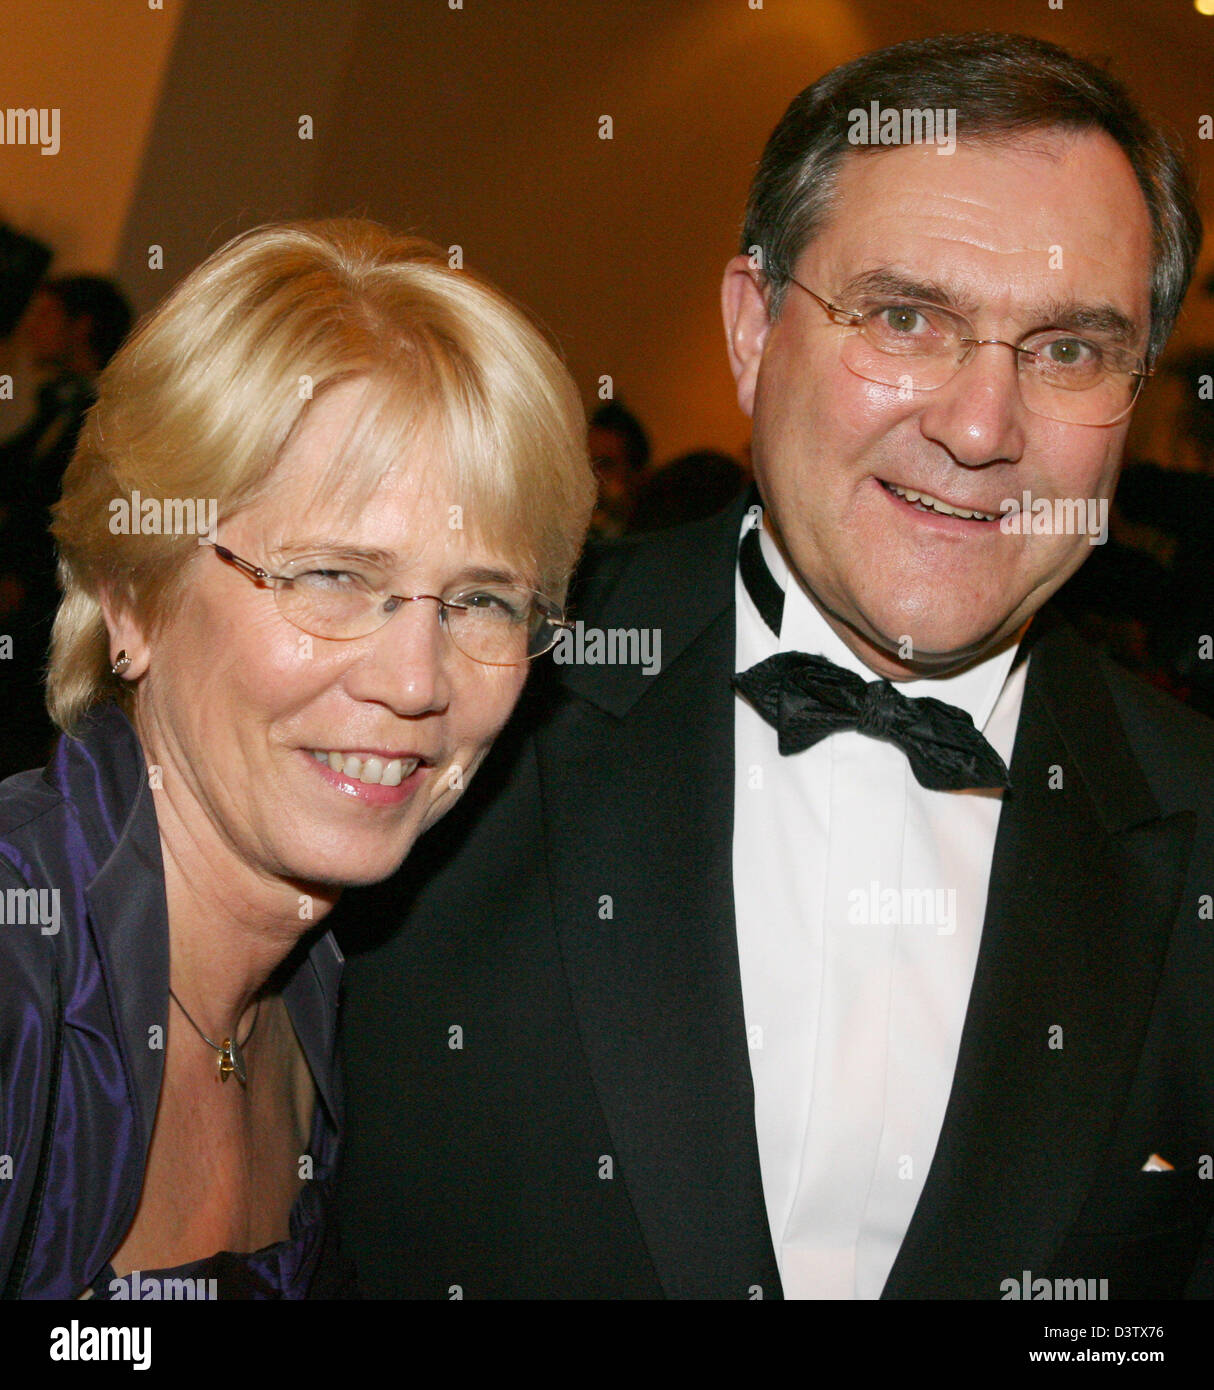 German Minister of Defence Franz Josef Jung (R) and his wife Beate pictured at the 55th Federal Press Ball in Berlin, Germany, Friday, 24 November 2006. 2,500 guests from politics, economy and the media were expected to the social event under the motto 'Magic worlds'. Photo: Steffen Kugler Stock Photo